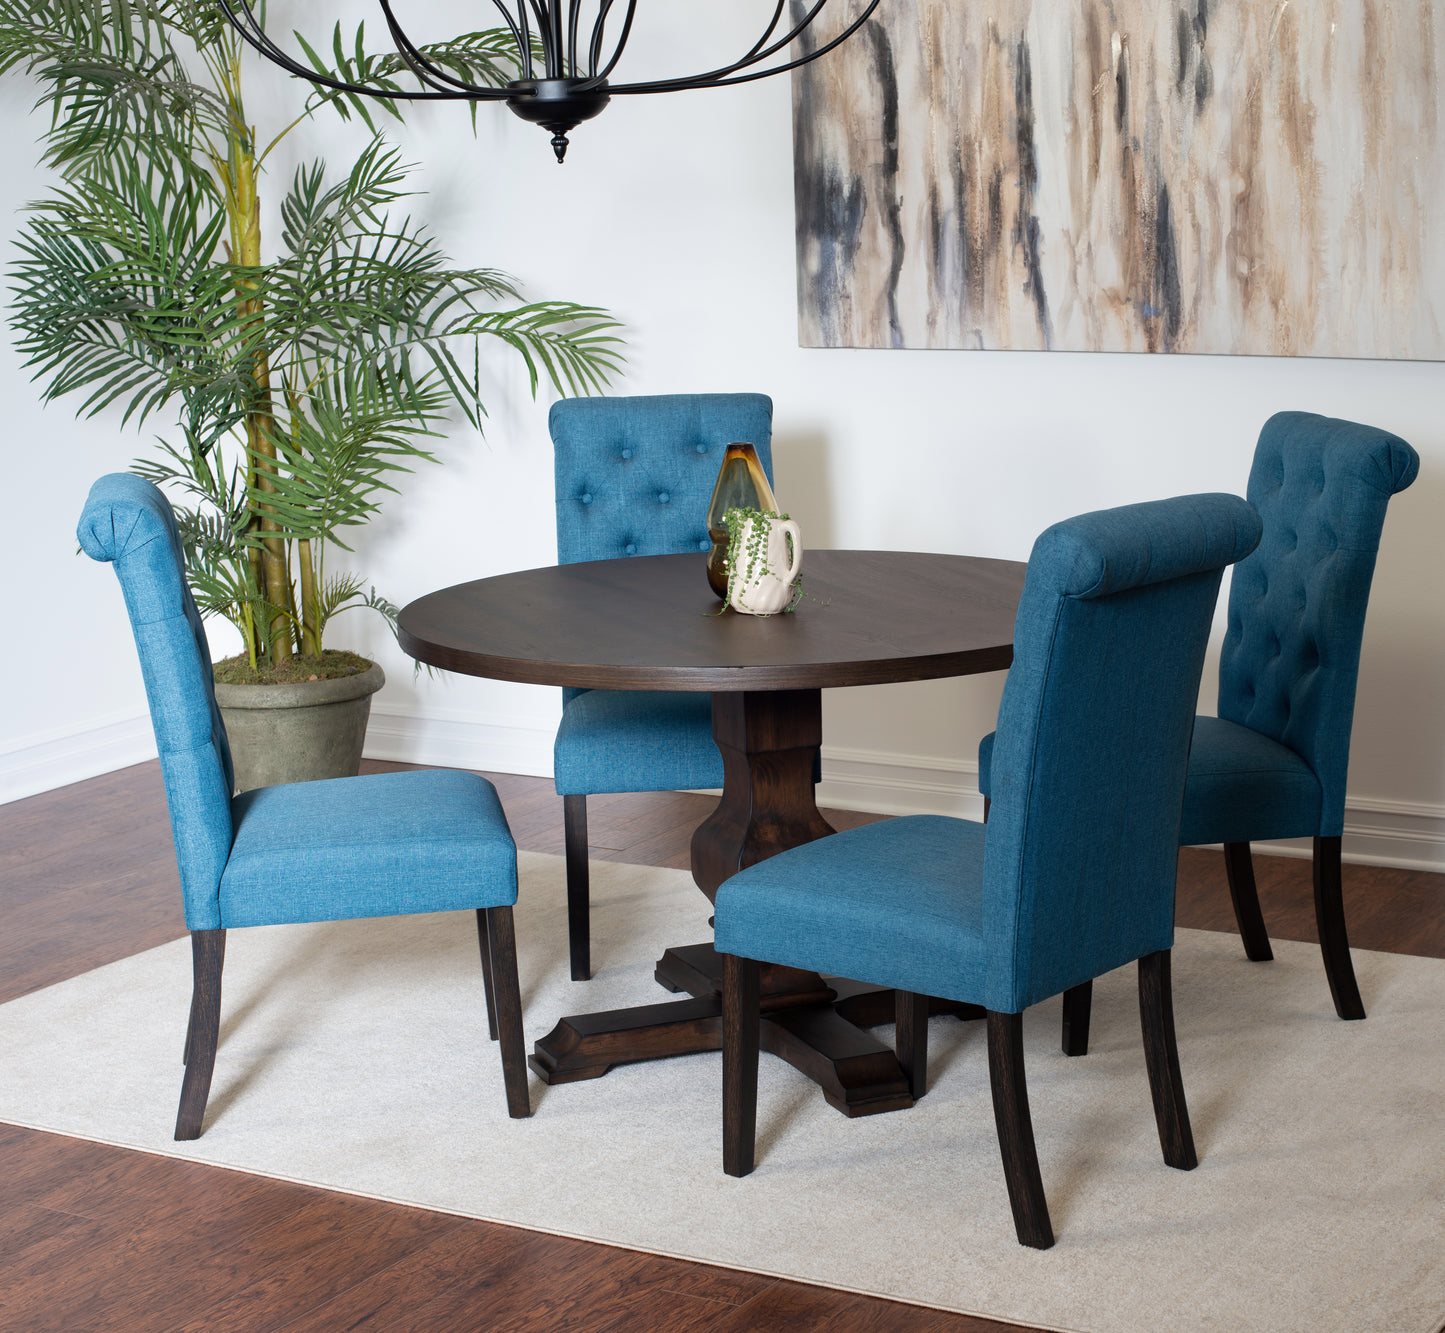 Kerbau 5-piece Dining Set, Pedestal Round Table with 4 Stylish Chairs